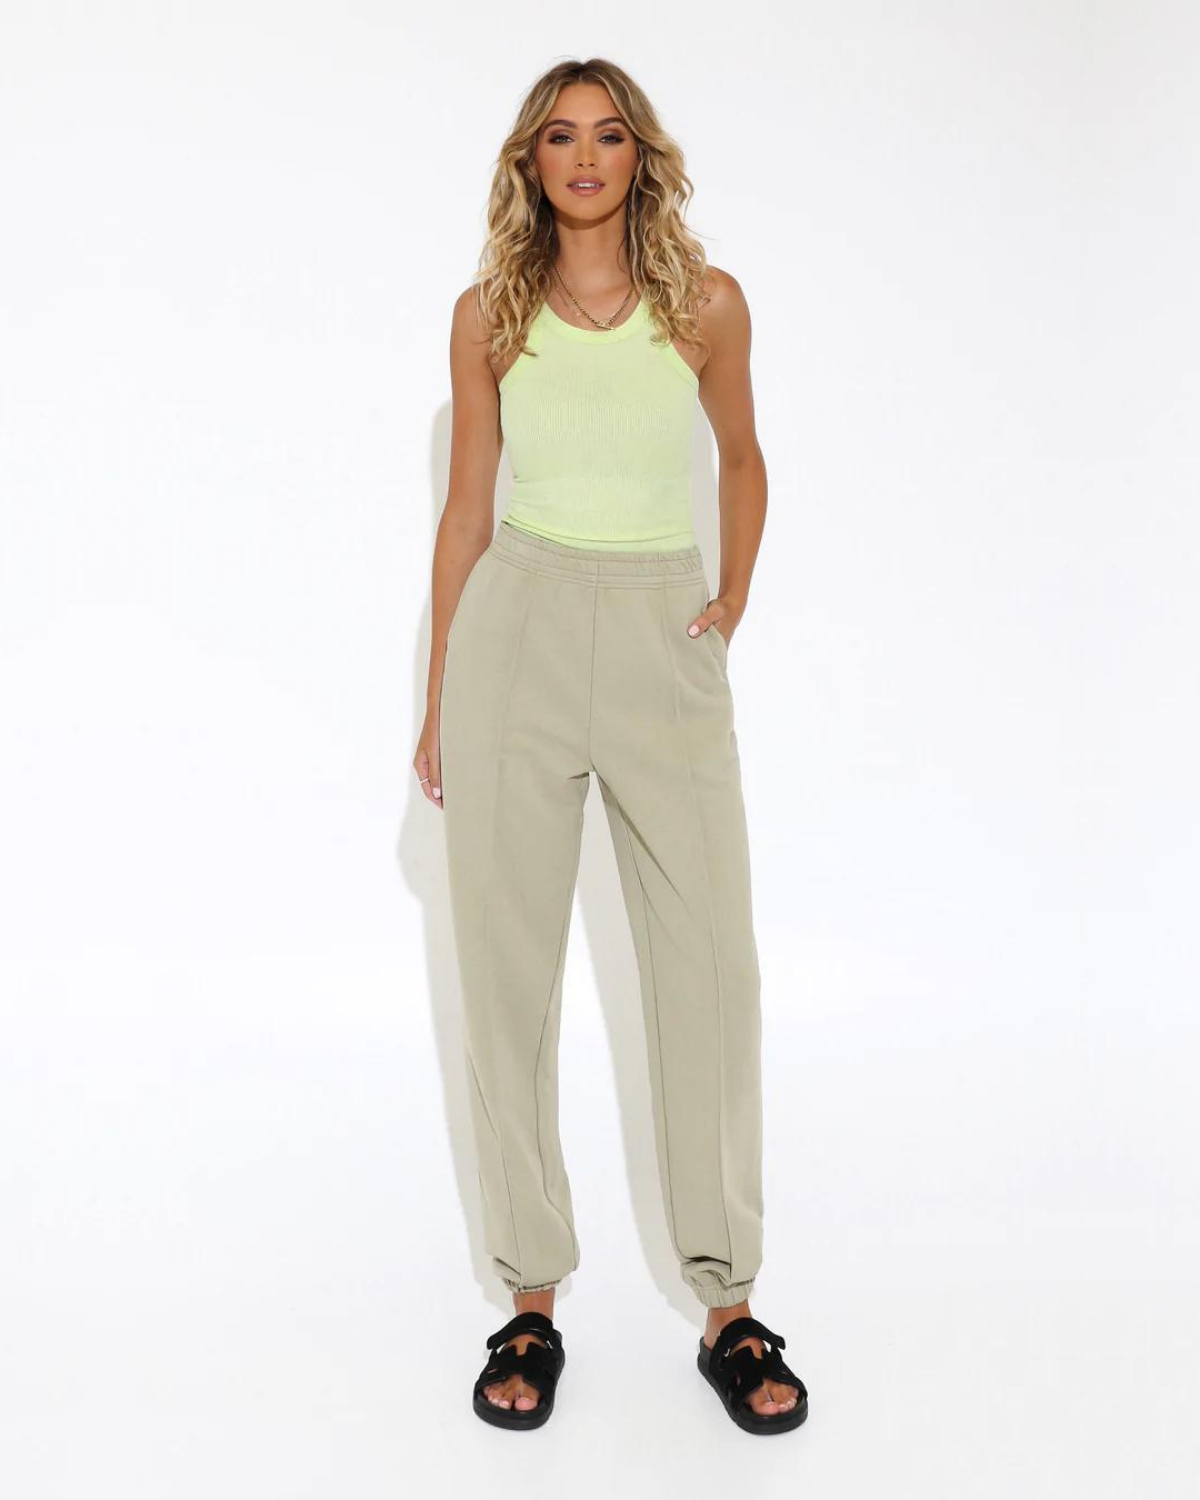 Abbie Tank Top - Lime | Madison the Label